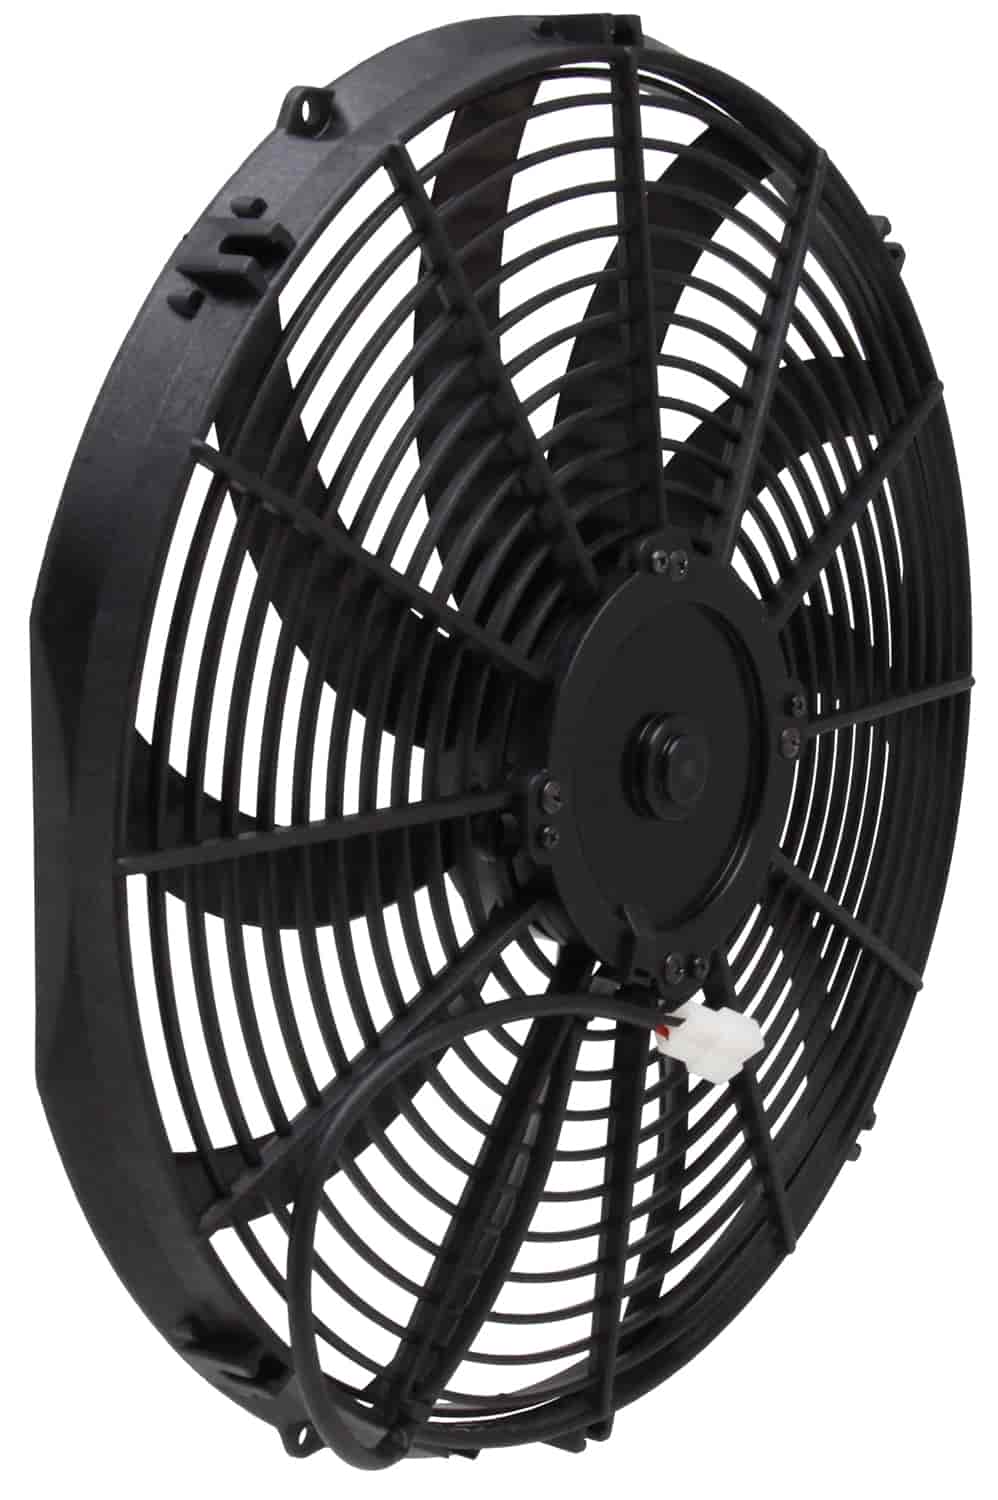 Stage 2 Turbo Series 16 in. Electric Fan [Puller]